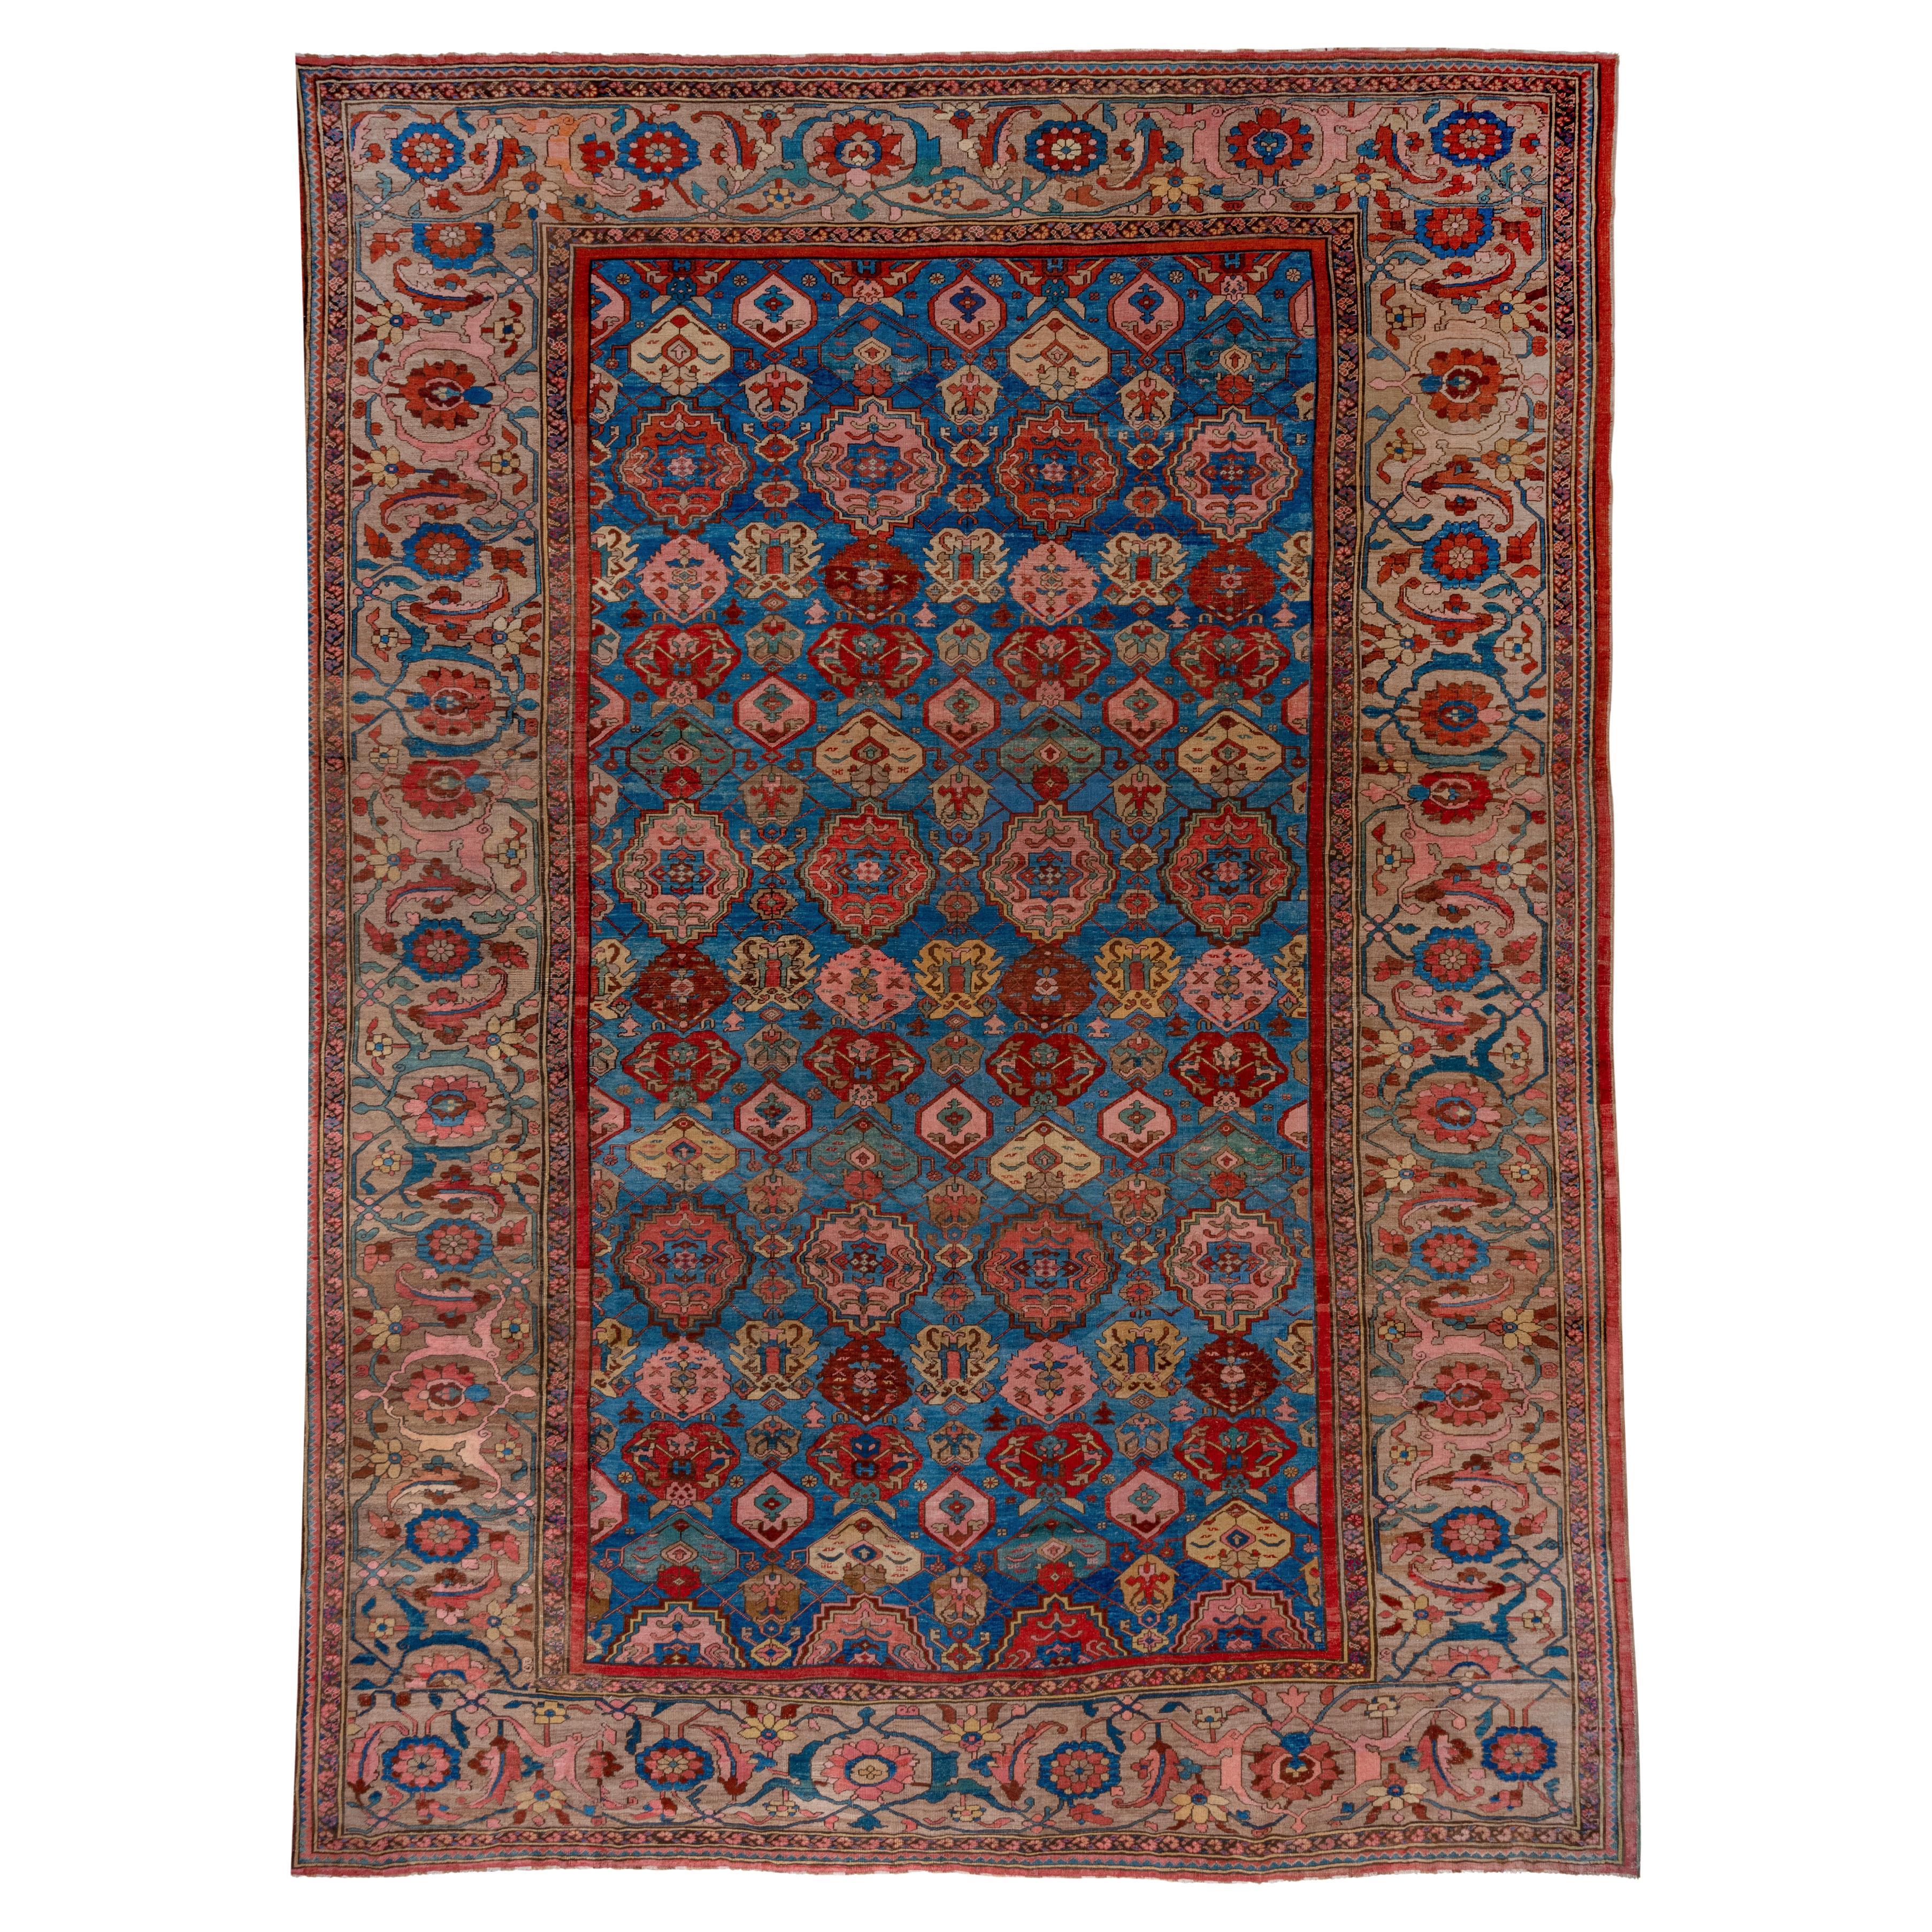 Outsanding Colorful Antique Persian Bakhshayesh Carpet, Late 19th Century For Sale